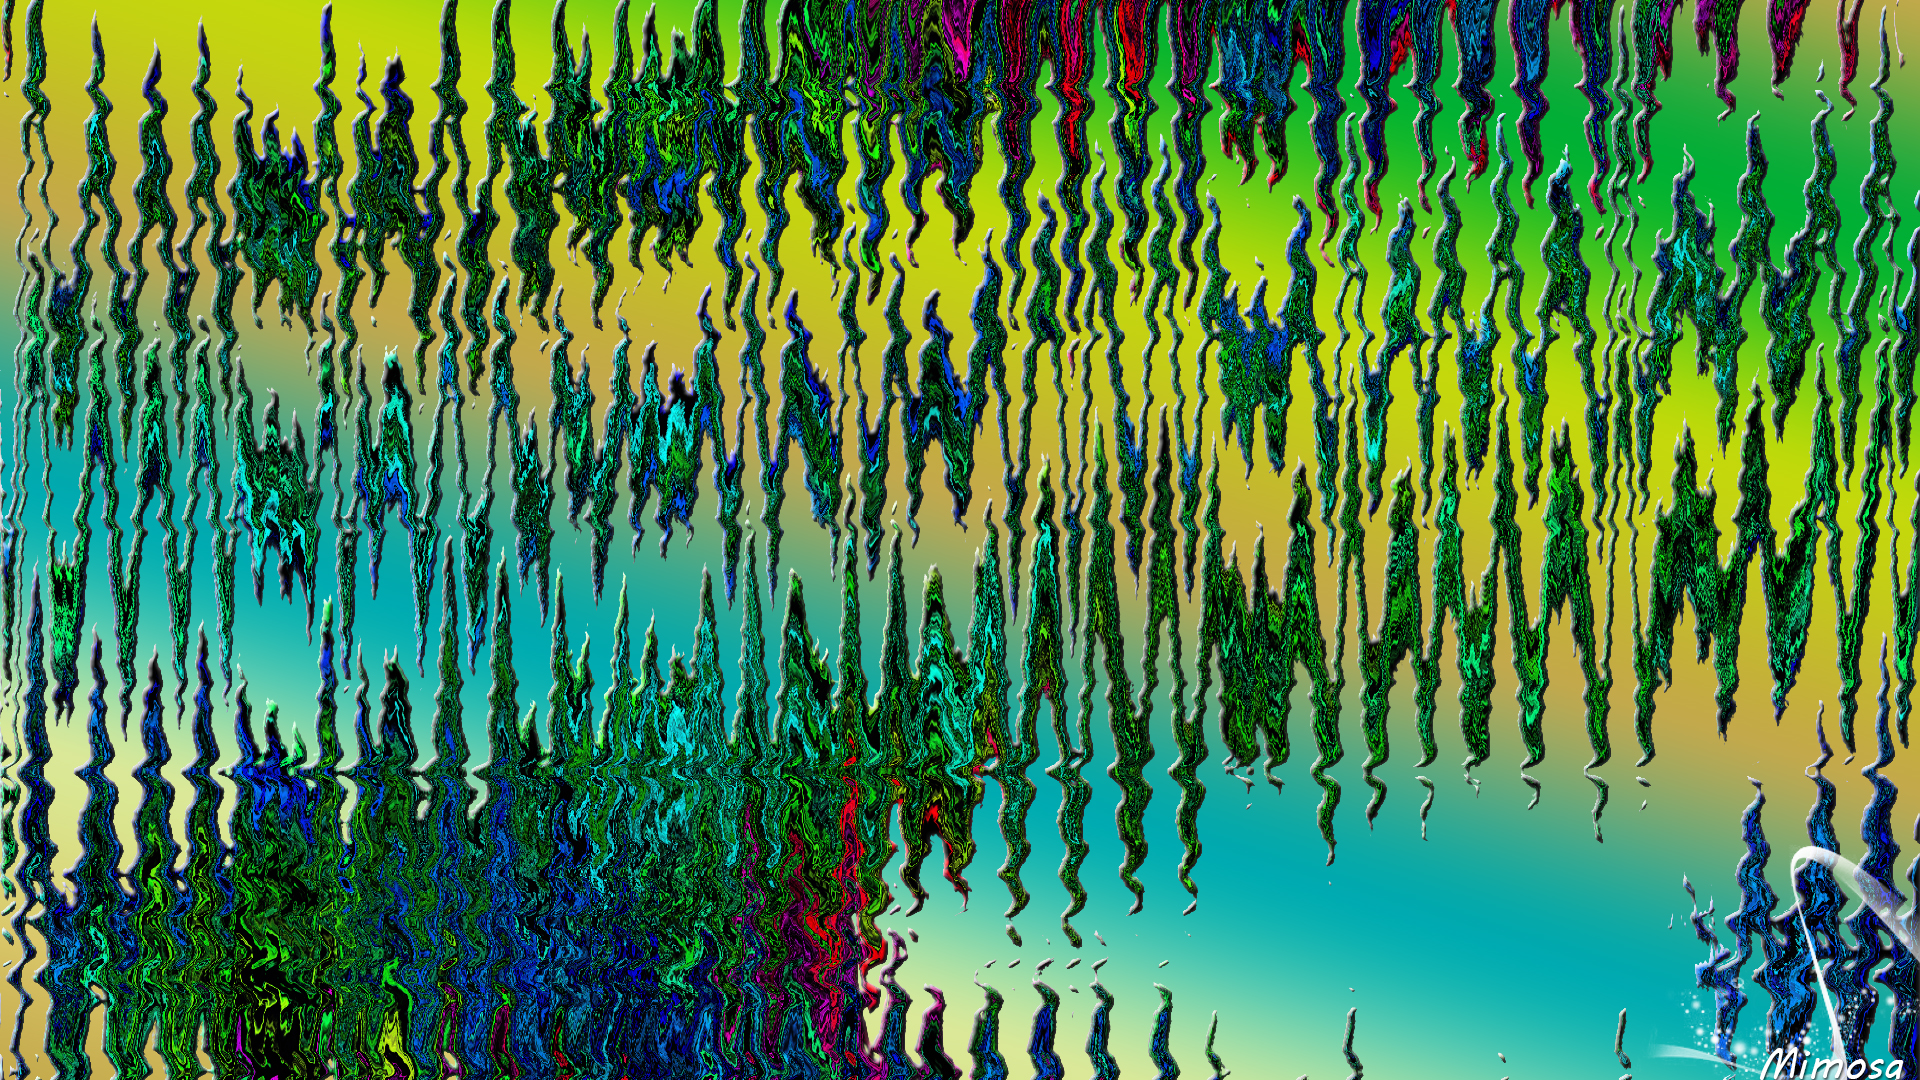 Abstract Artistic Colorful Colors Digital Art Wave 1920x1080